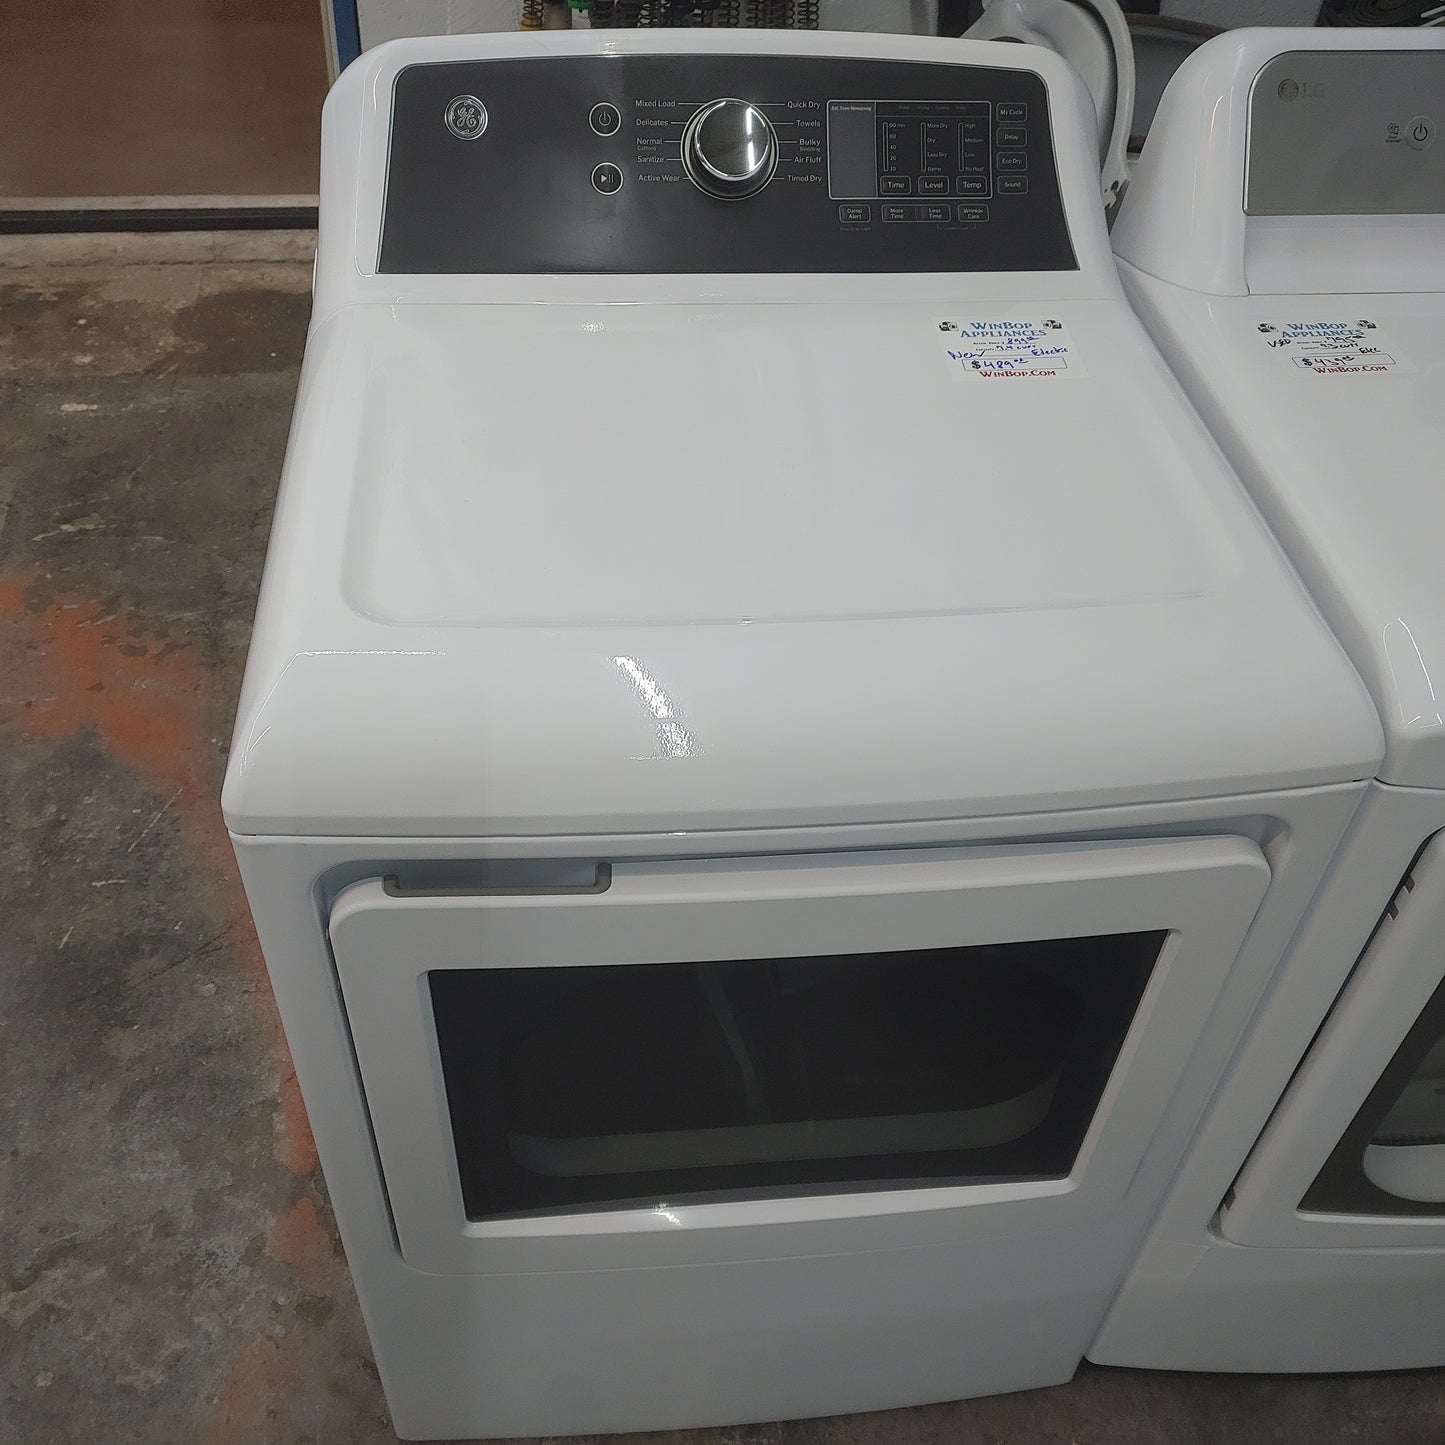 New GE 7.4 cubic foot electric dryer